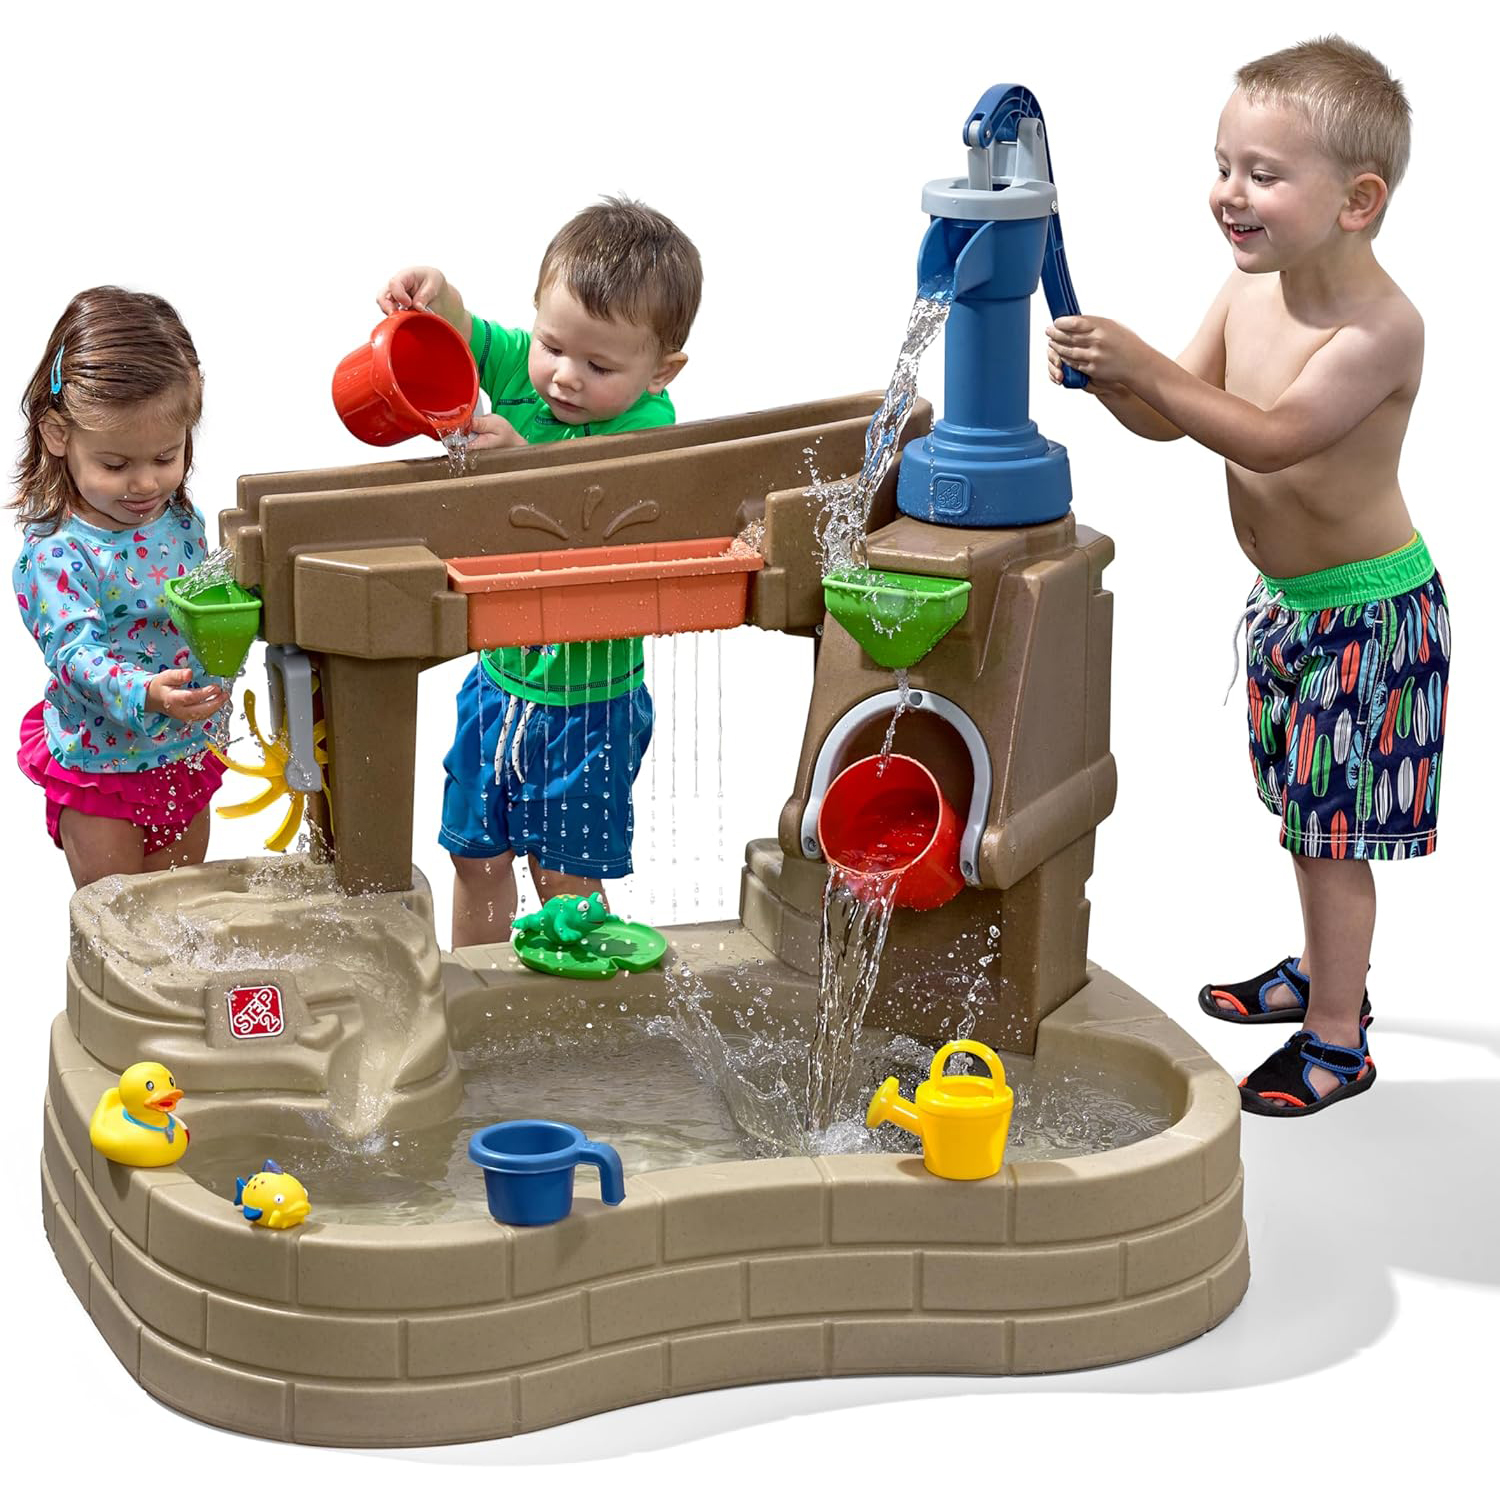 fun outdoor toys for kids - water toy